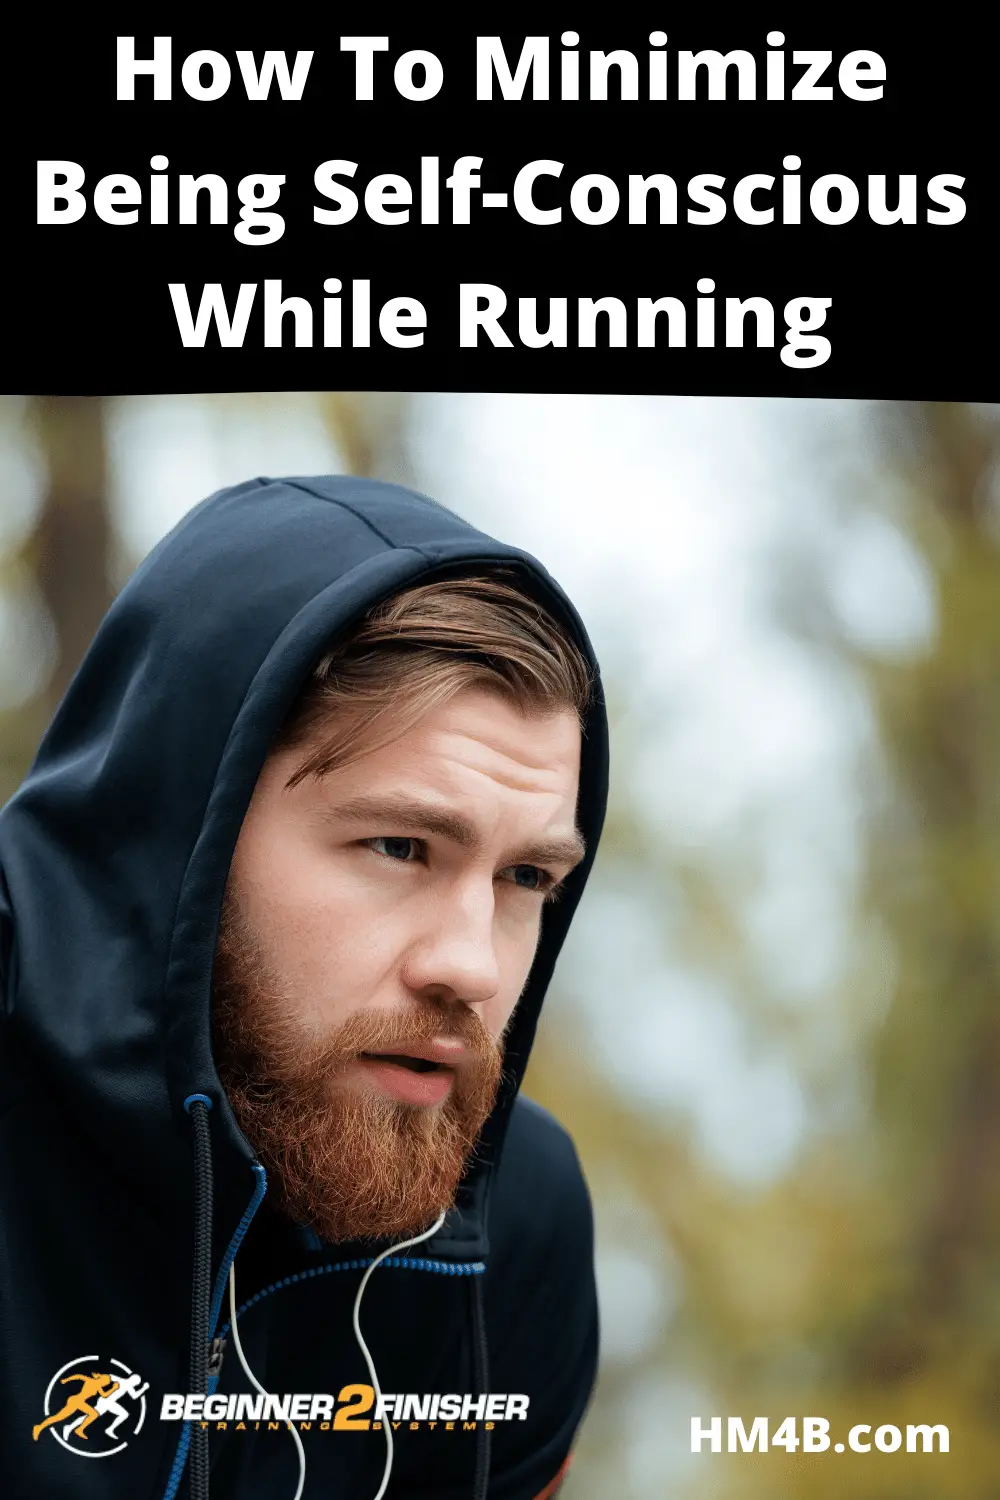 7 Tips To Help Minimize Being Self-Conscious While Running